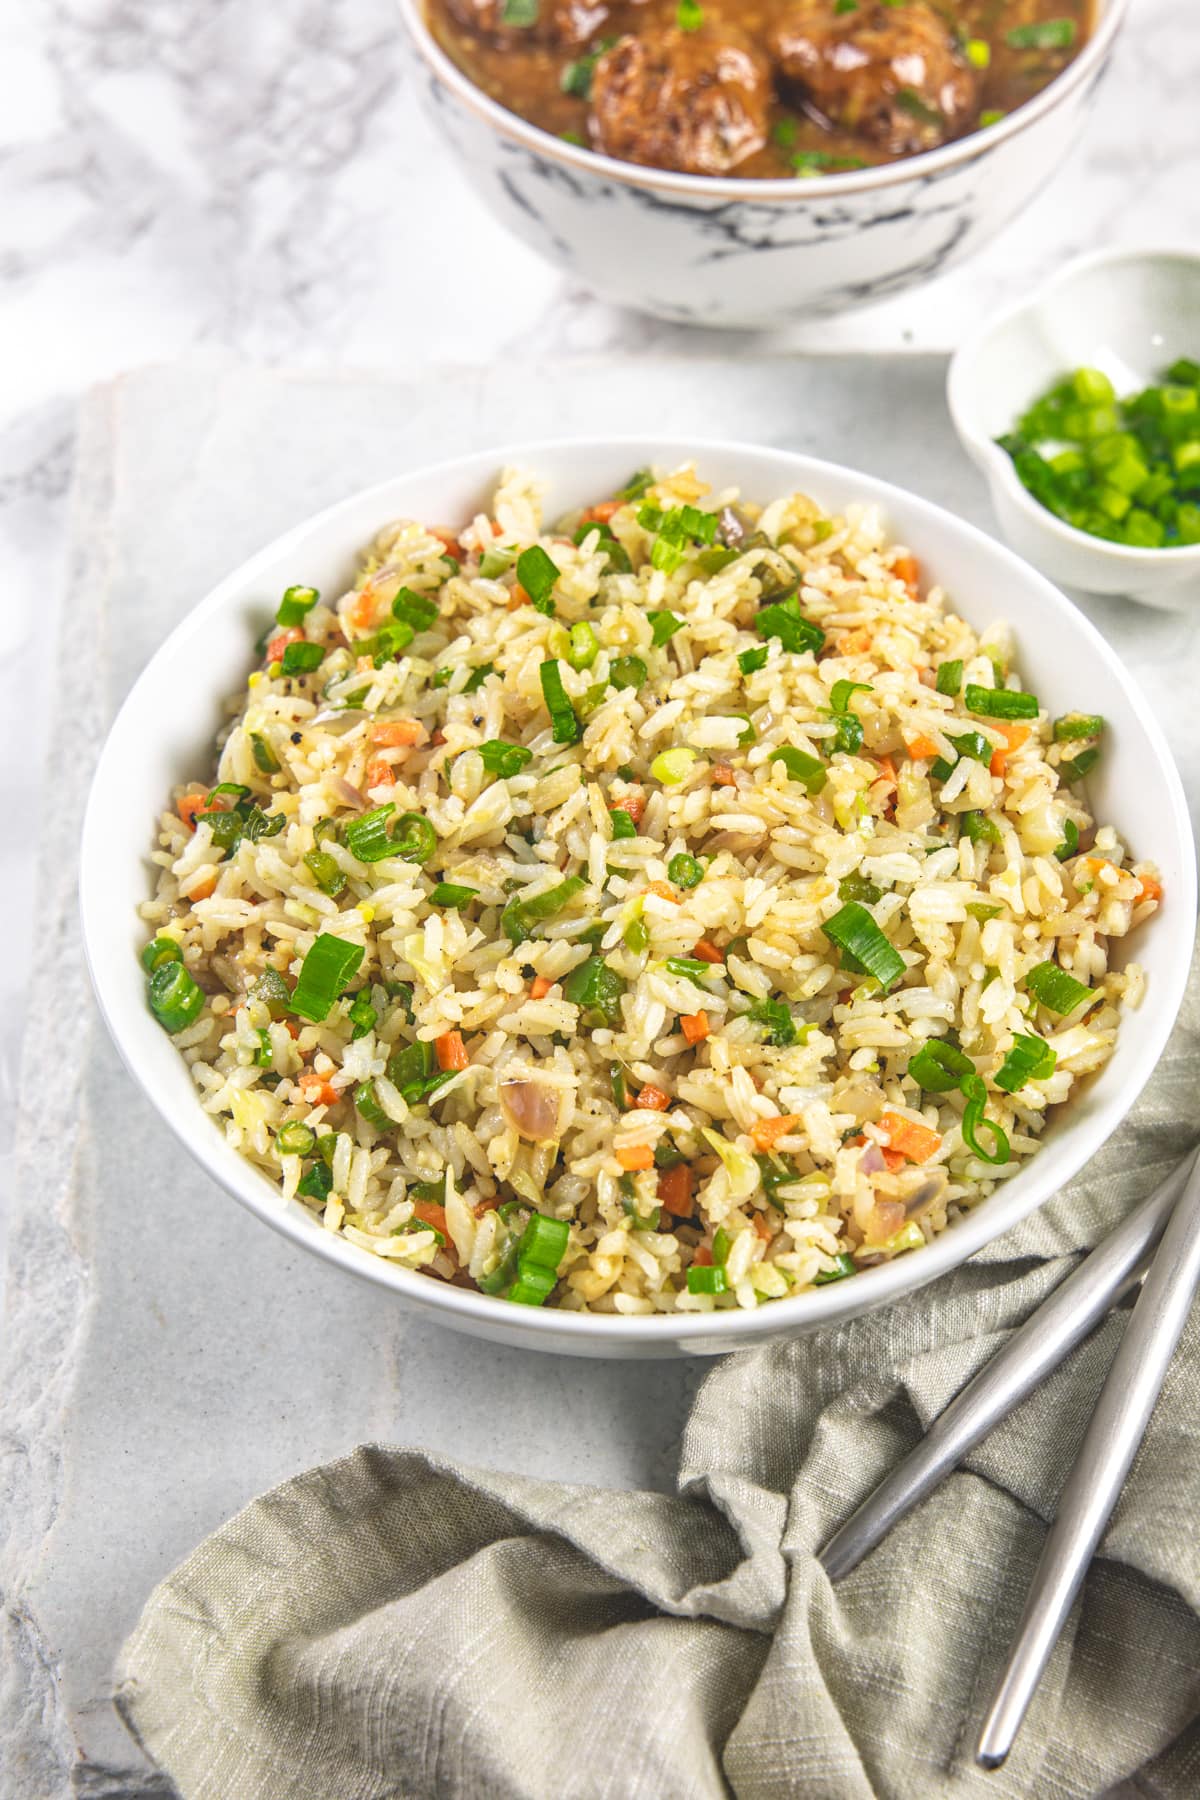 A bowl of veg fried rice with napkin, forks on the side.